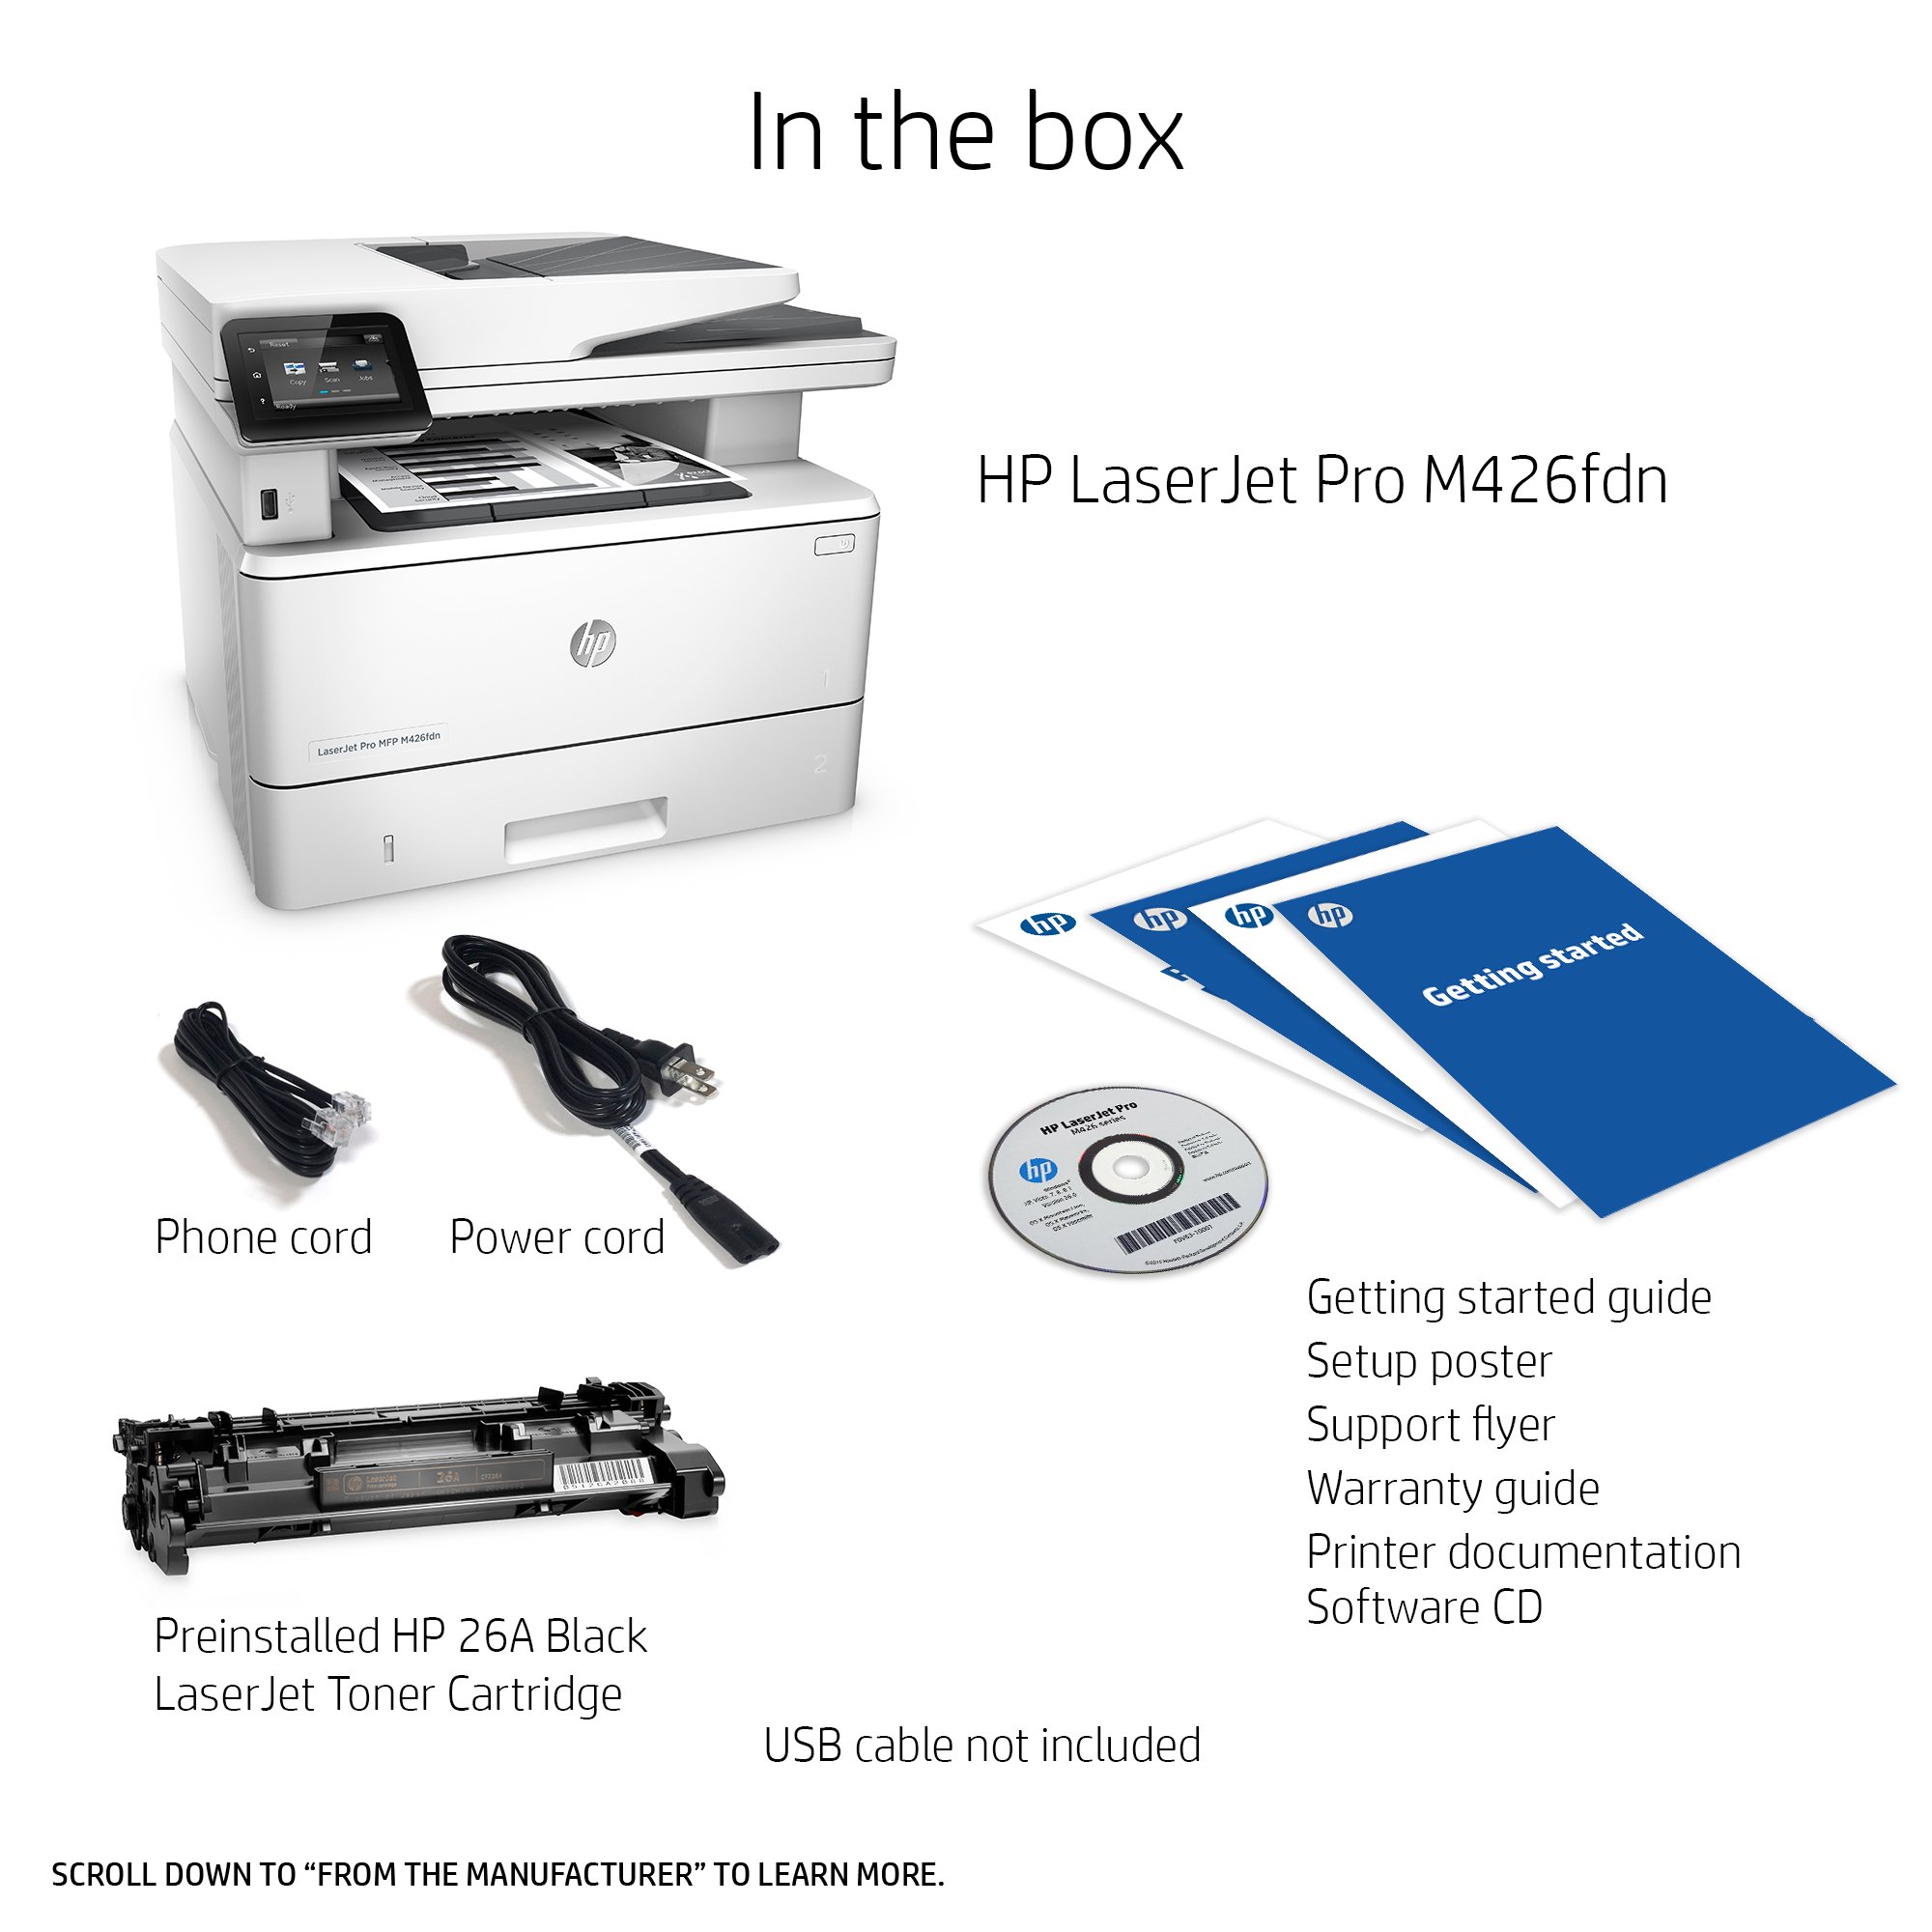 HP LaserJet Pro M426fdn All-in-One Laser Printer with Built-in Ethernet & Double-Sided Printing, Amazon Dash replenishment ready (F6W14A)